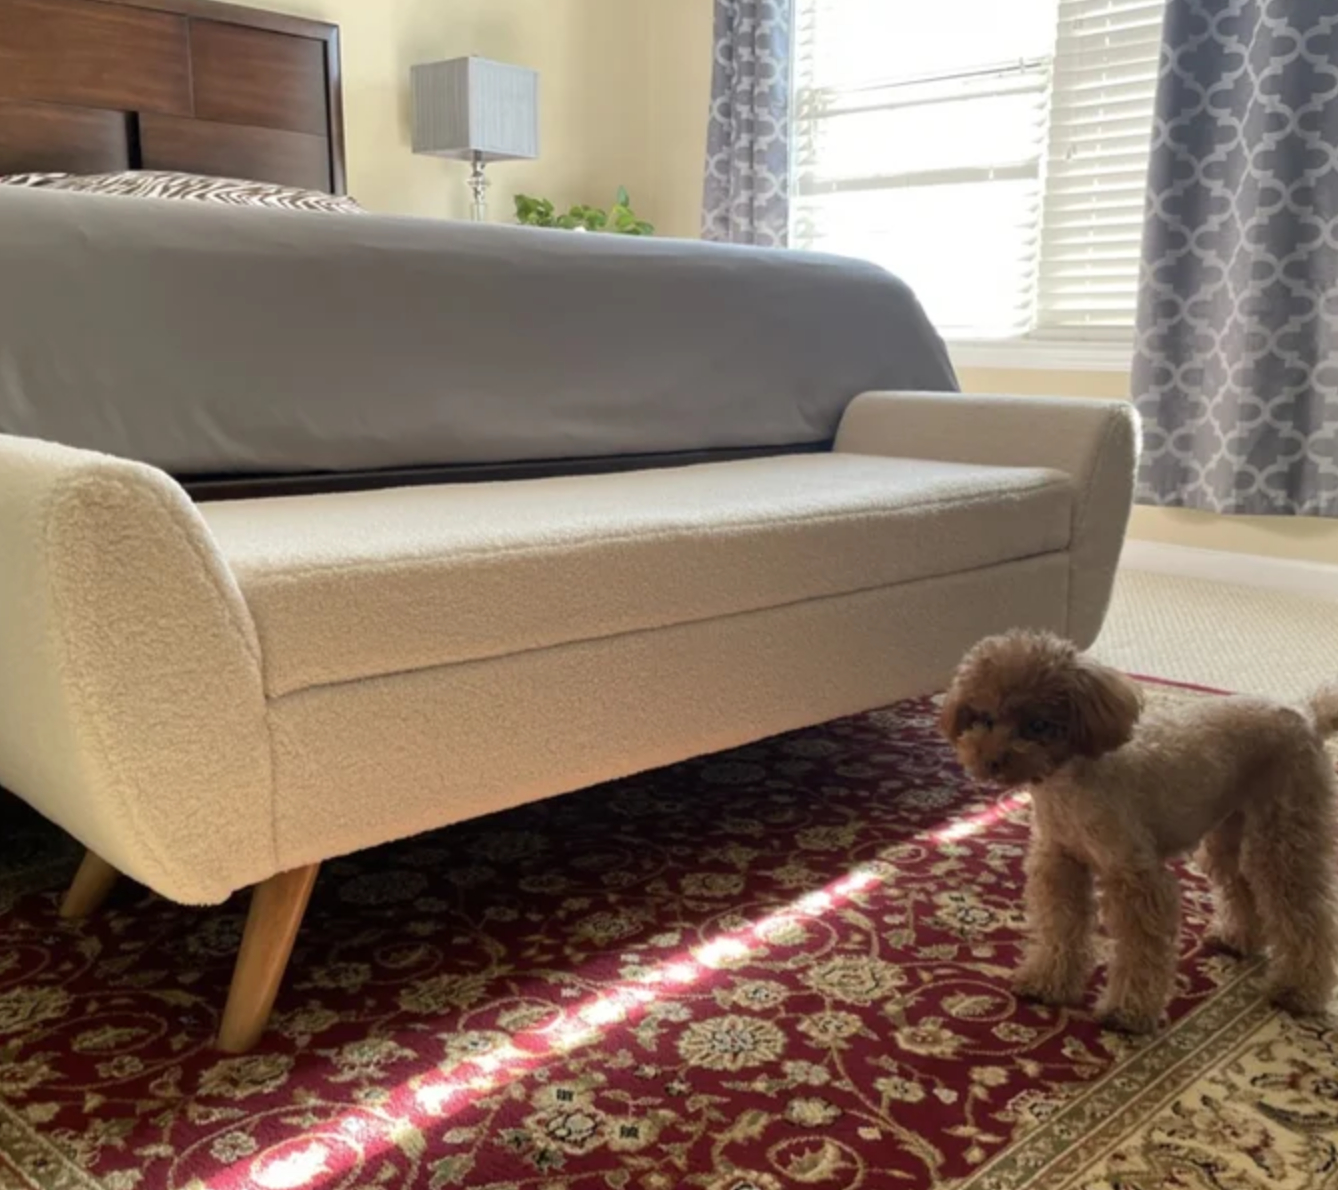 a storage bench at the foot of a bed with a dog